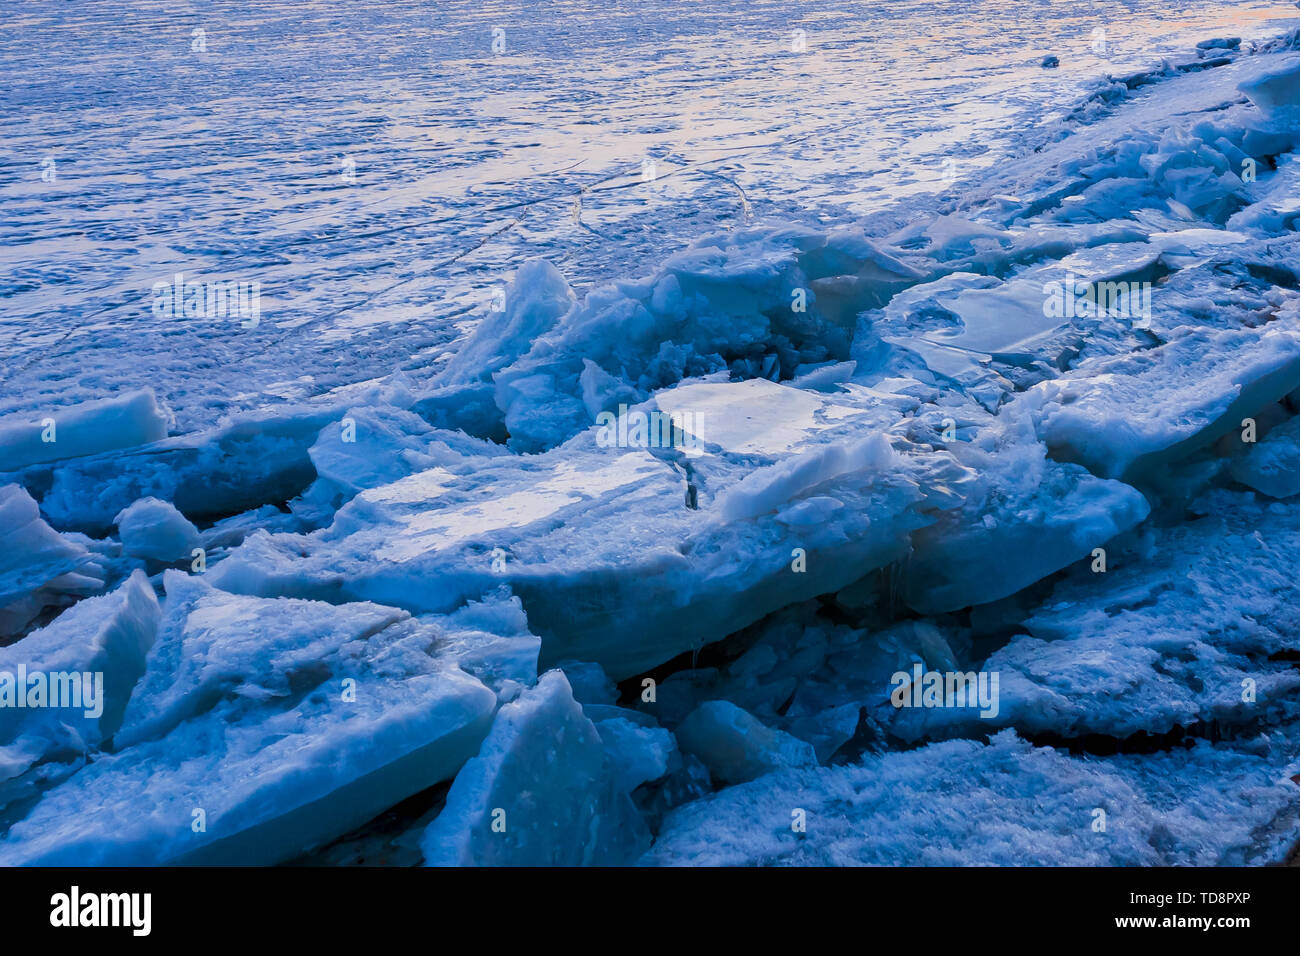 Blue Ice Lake, the stars are bright. On March 4, 2019, Xingkai Lake, the Sino-Russian border lake in southeastern Heilongjiang, had a fine weather, and the frozen lake thousands of miles under the setting sun became a blue ice world. Stock Photo